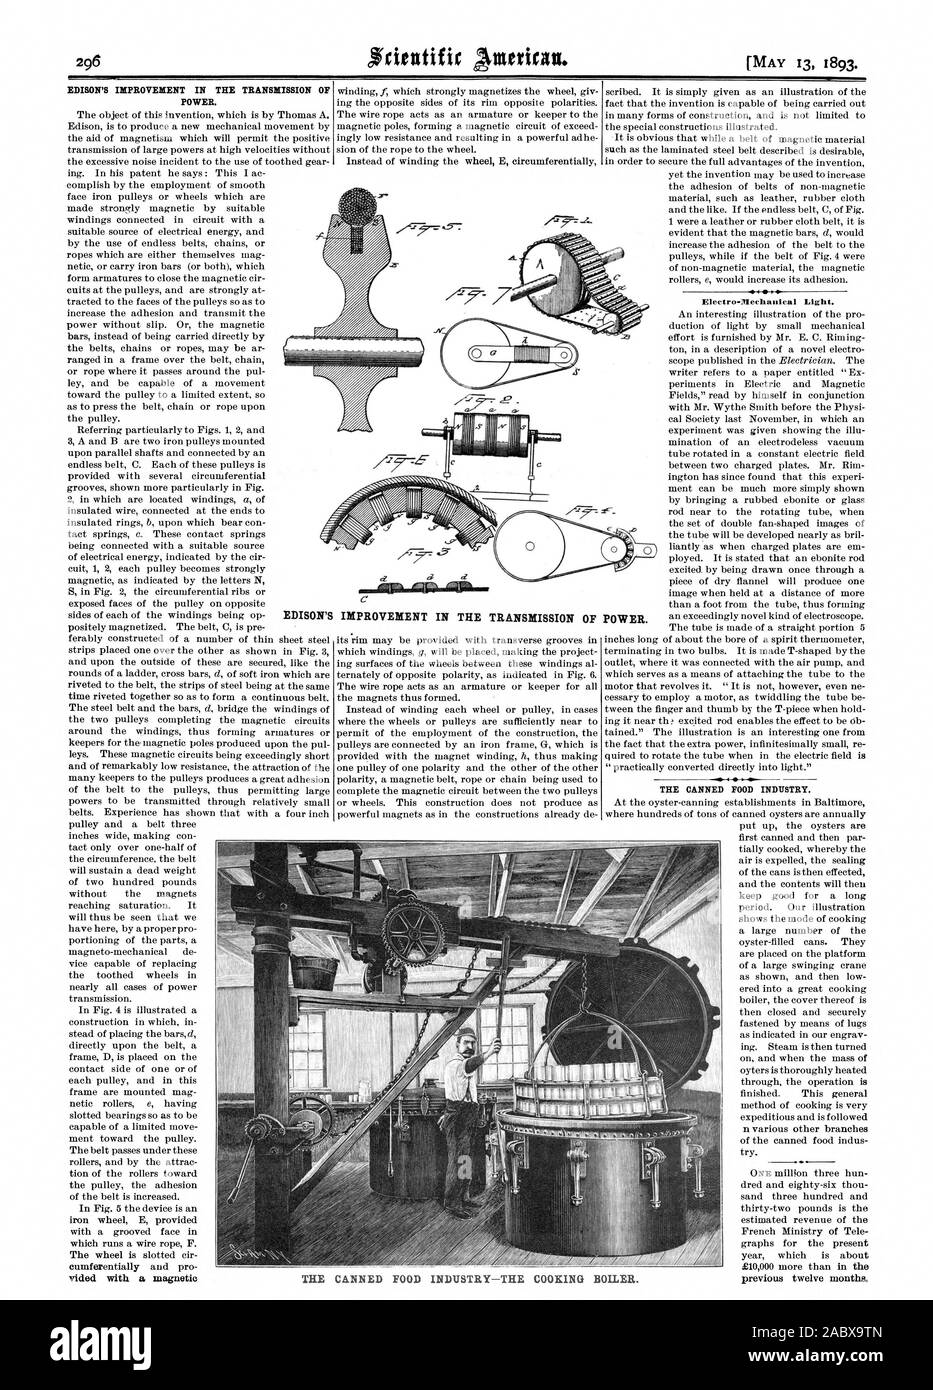 EDISON'S IMPROVEMENT IN THE TRANSMISSION OF POWER. IMPROVEMENT IN THE TRANSMISSION OF Electro-Plechanical Light. THE CANNED FOOD INDUSTRY. THE CANNED FOOD INDUSTRY-THE COOKING BOILER., scientific american, 1893-05-13 Stock Photo